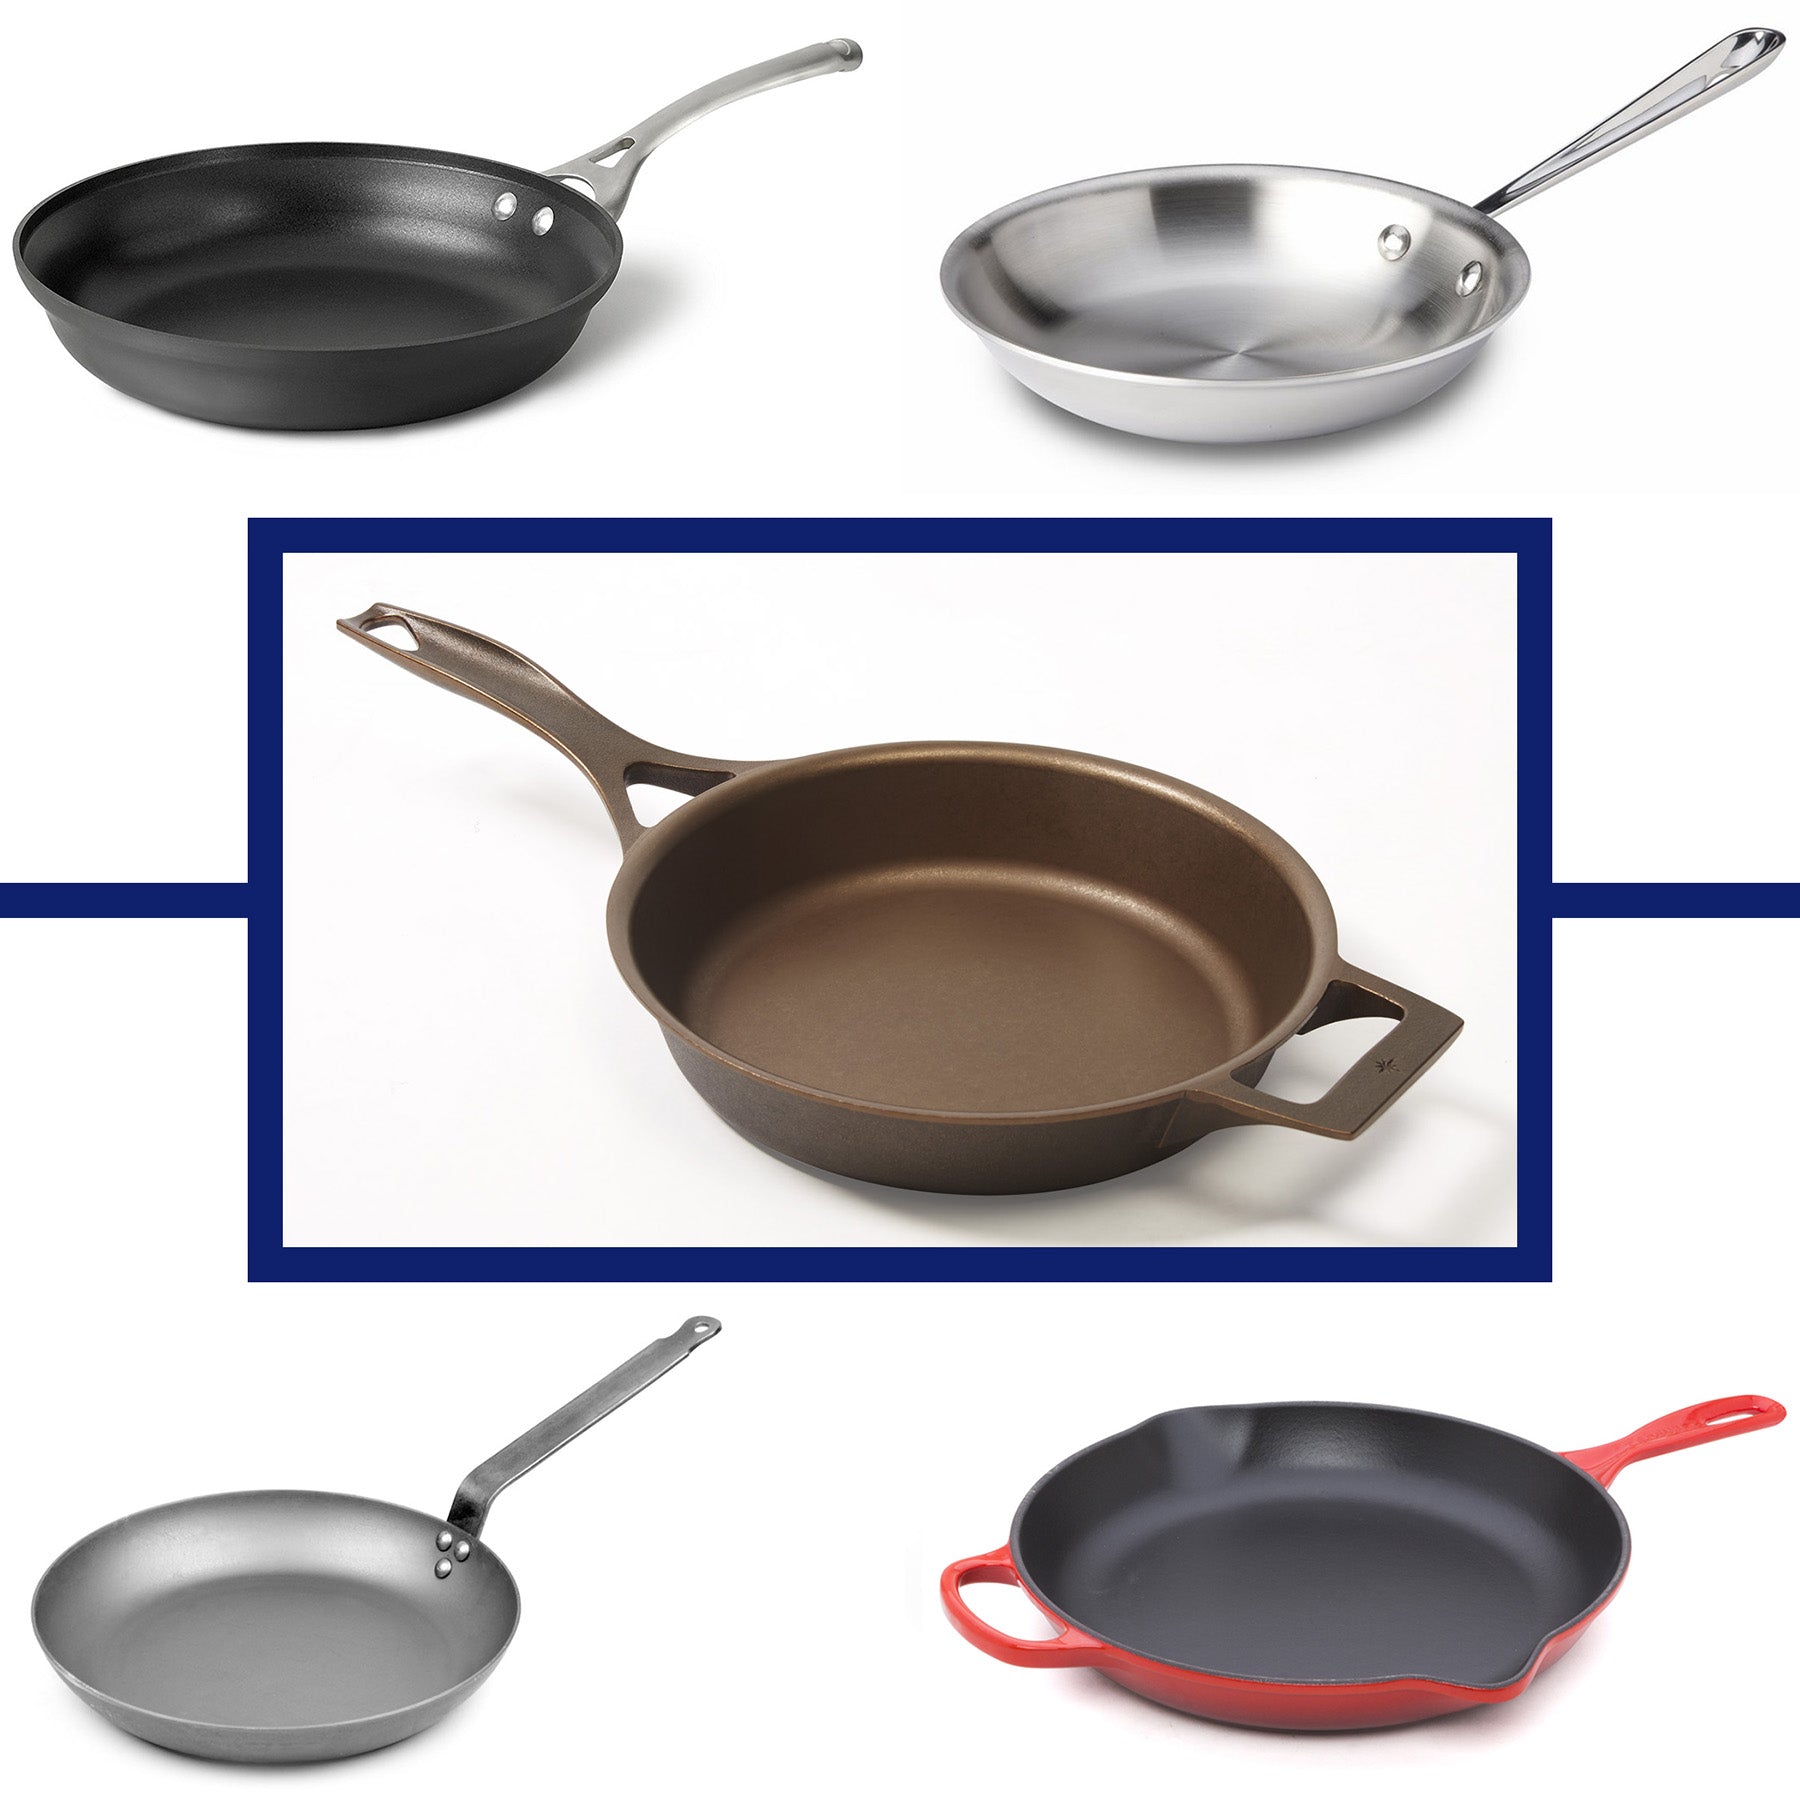 Pros and Cons of Different Types of Cookware